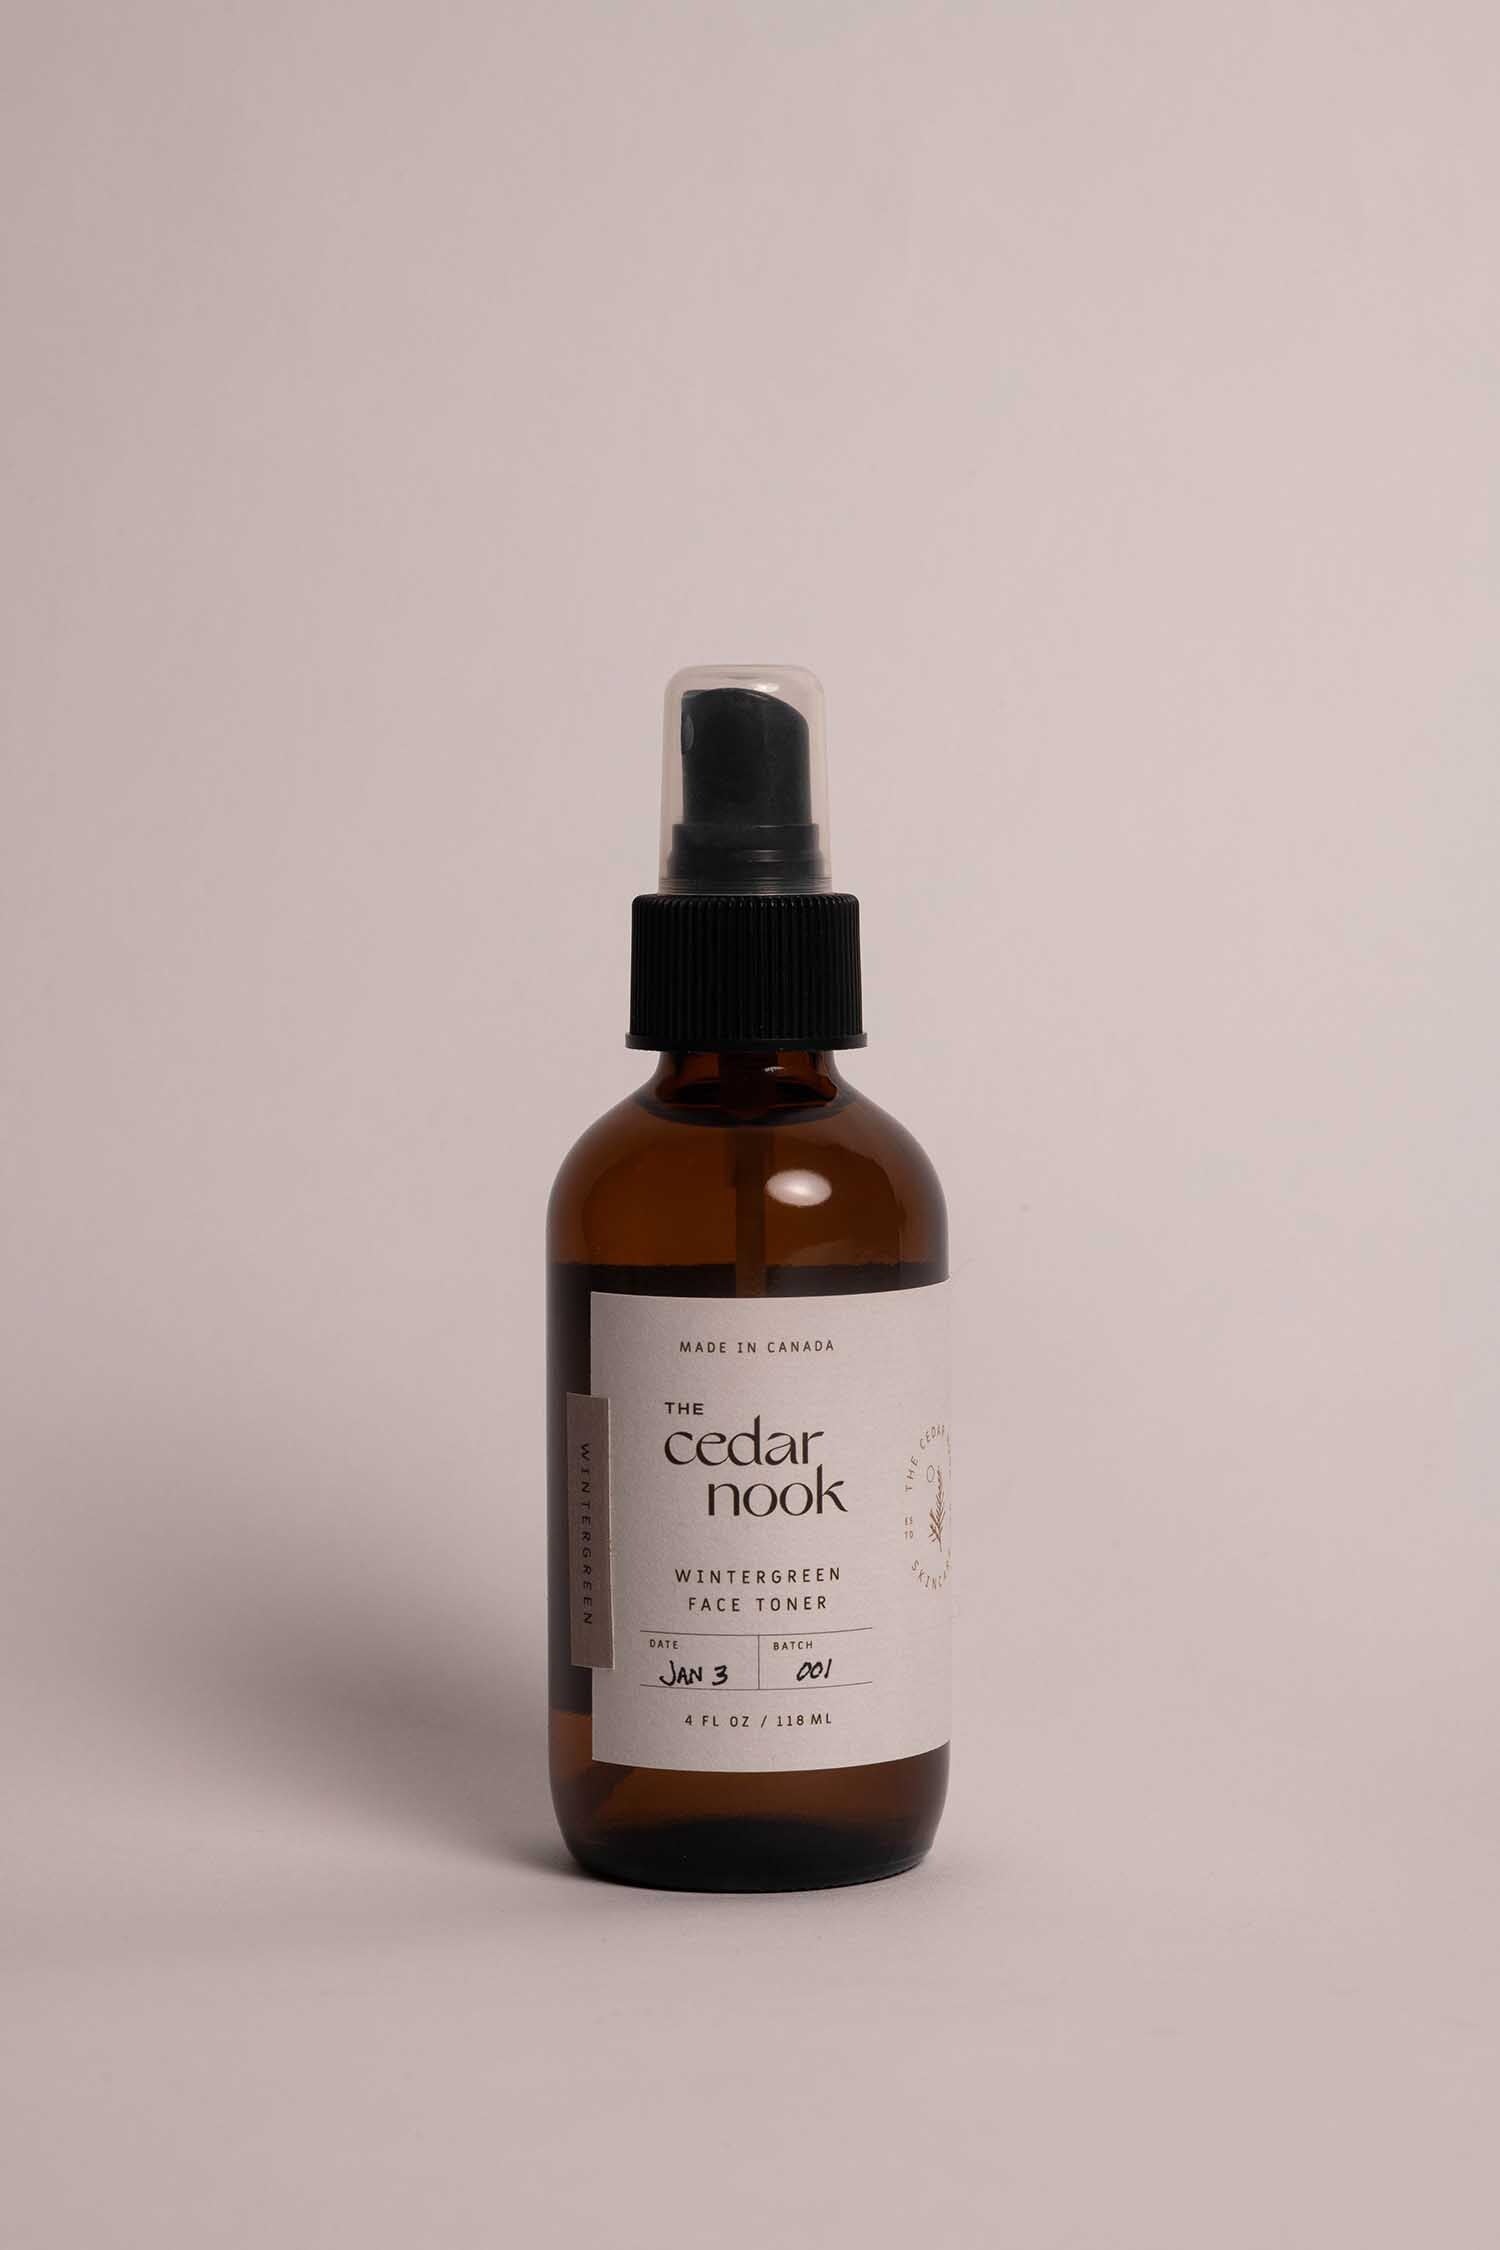 The Cedar Nook Wintergreen Face Toner in a 4 oz amber glass bottle with a spray top, standing alone on a white background, showing the front white label with forest green logo